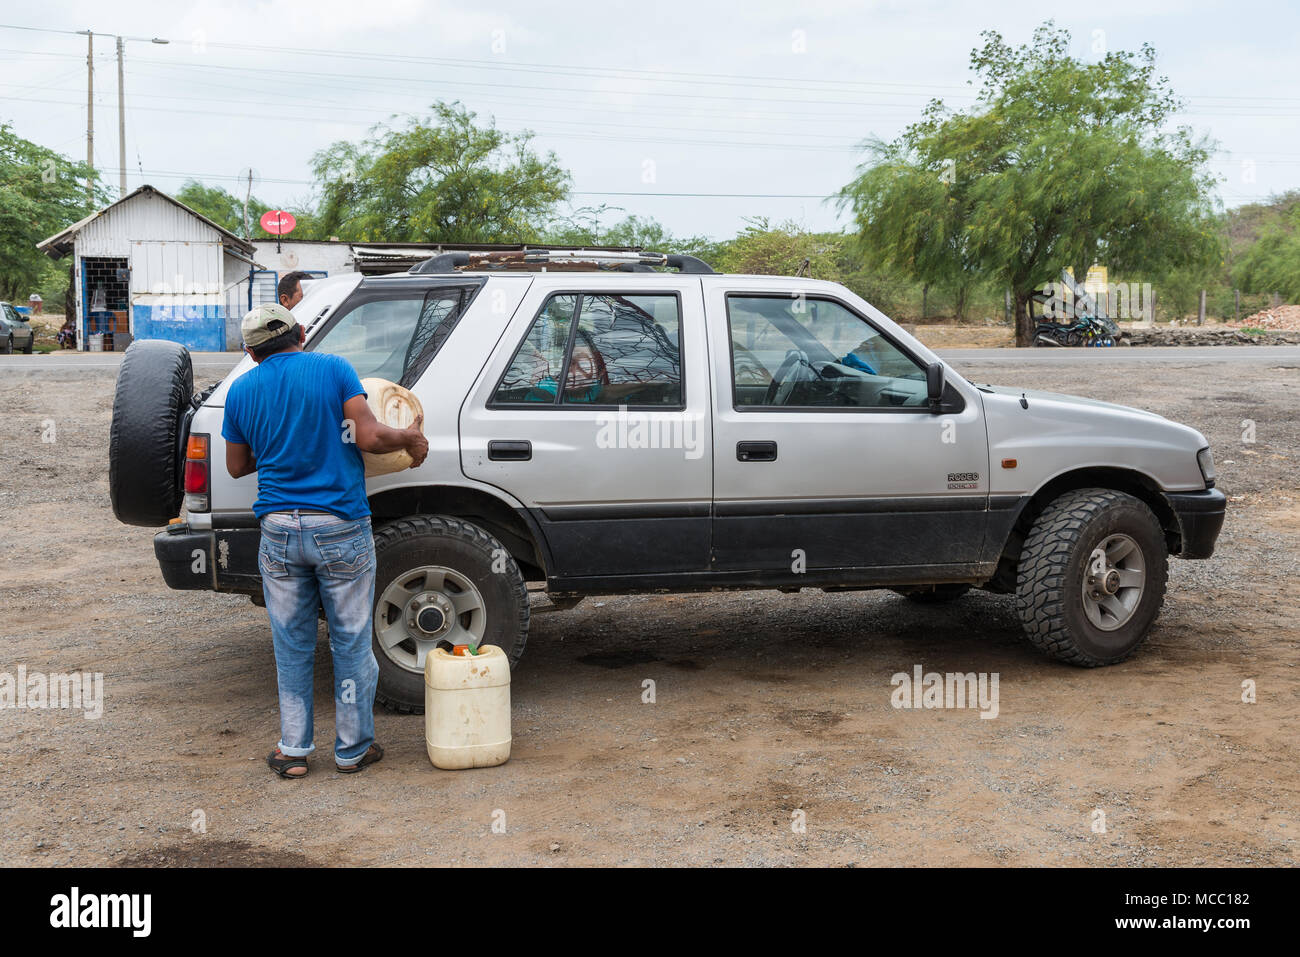 A man fills up gasoline for a car at a rural petro station. Colombia, South America. Stock Photo